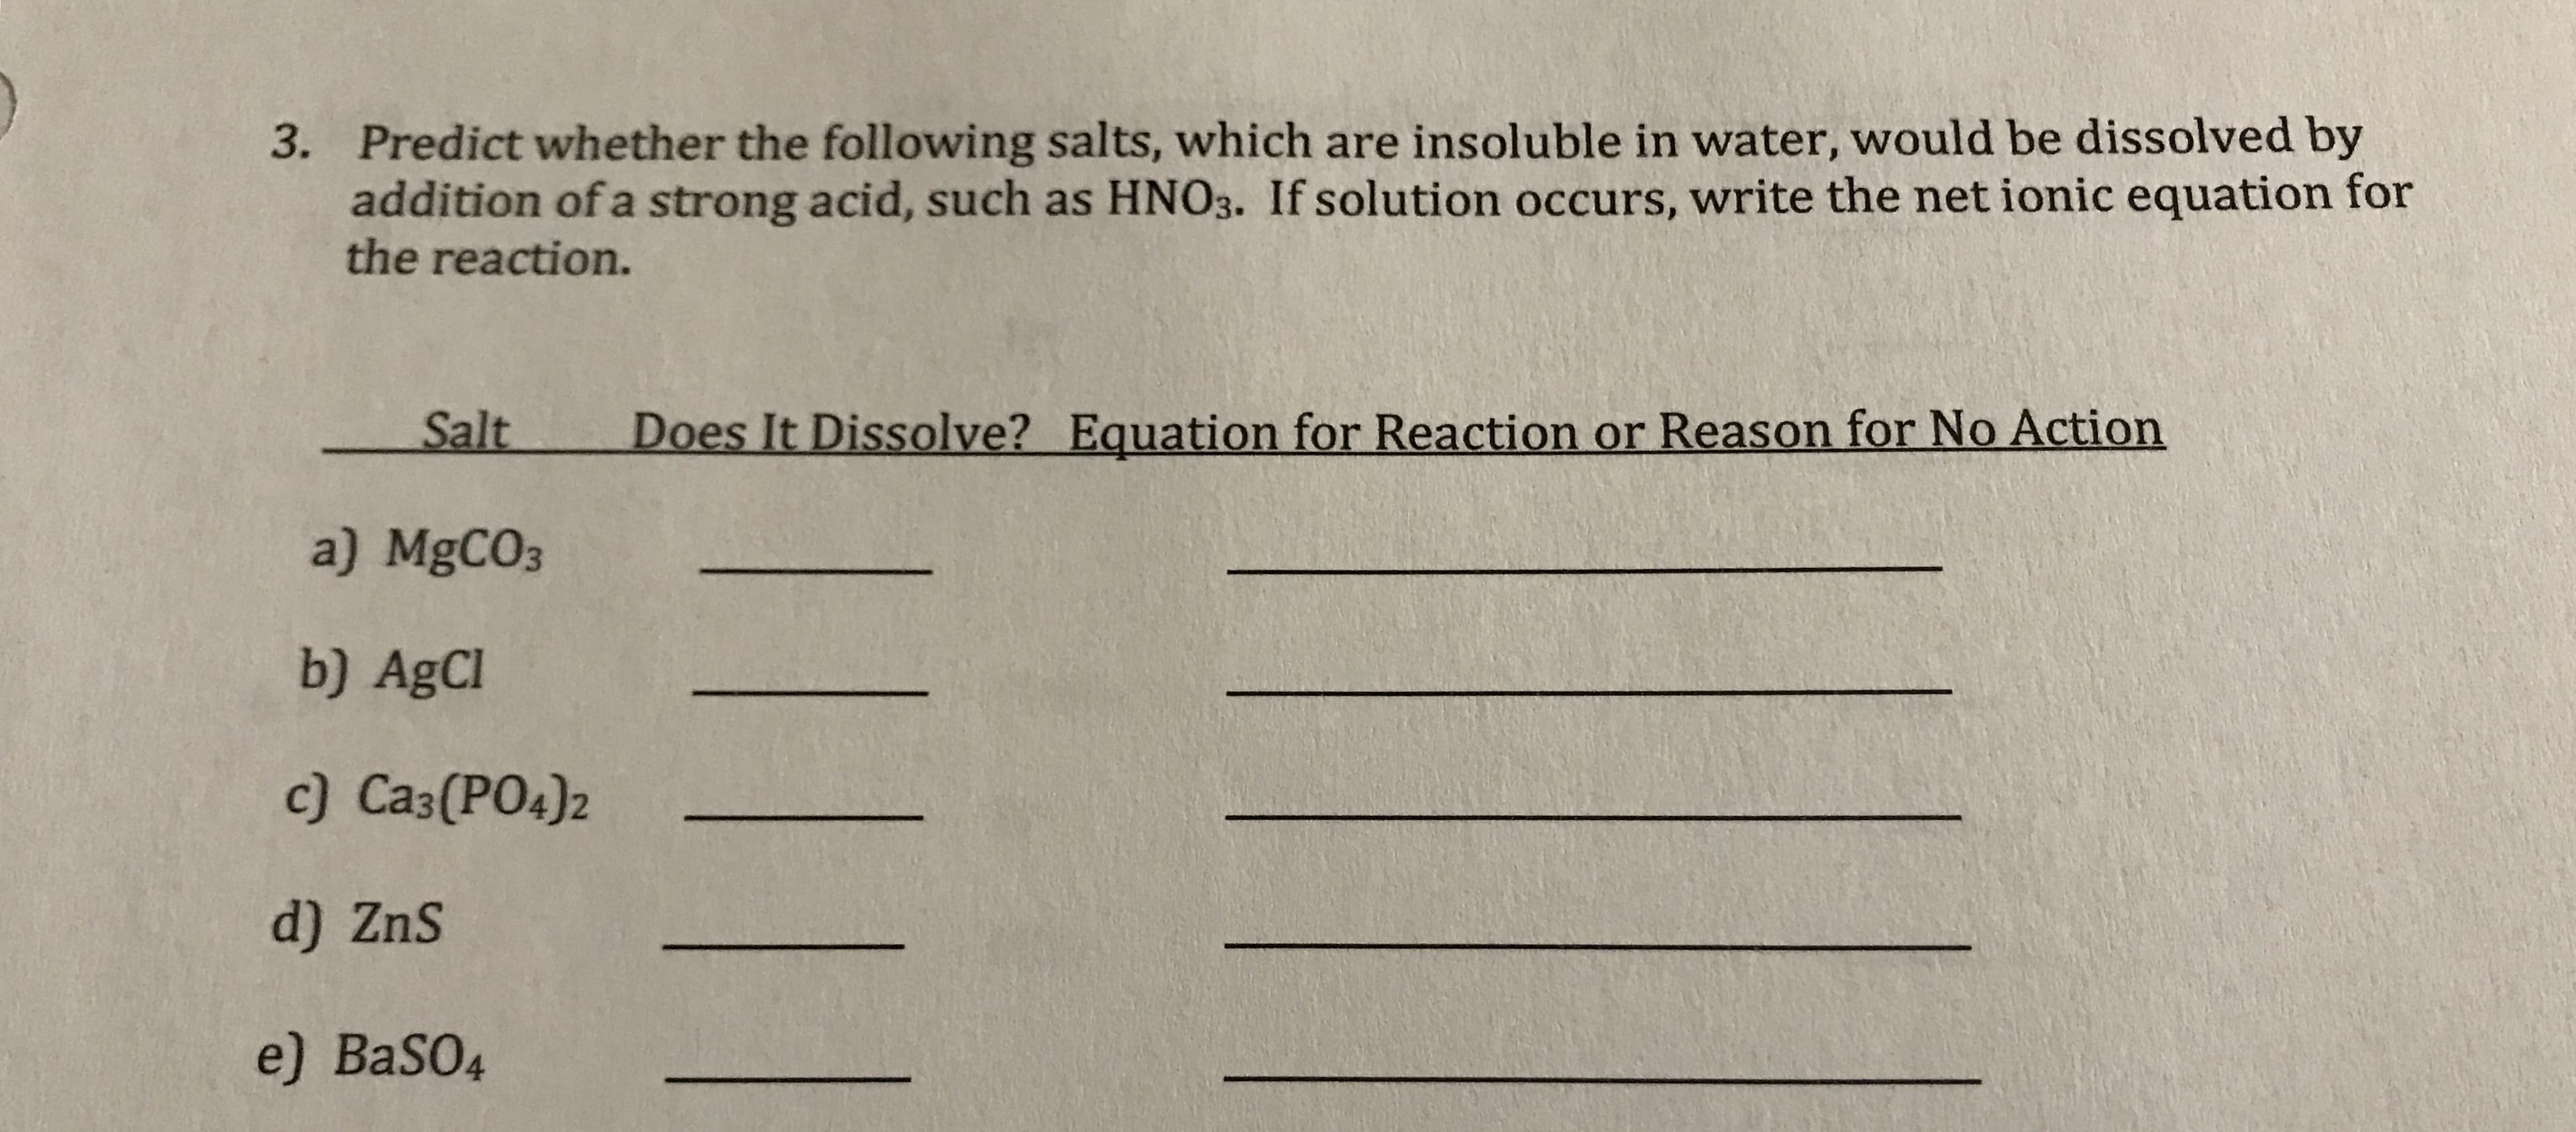 3. Predict whether the following salts, which are insoluble in water, would be dissolved by
addition of a strong acid, such as HNO3. If solution occurs, write the net ionic equation for
the reaction.
Salt
Does It Dissolve? Equation for Reaction or Reason for No Action
a) MgCO3
b) AgCl
c) Ca3(PO4)2
d) ZnS
e) BaSO4
